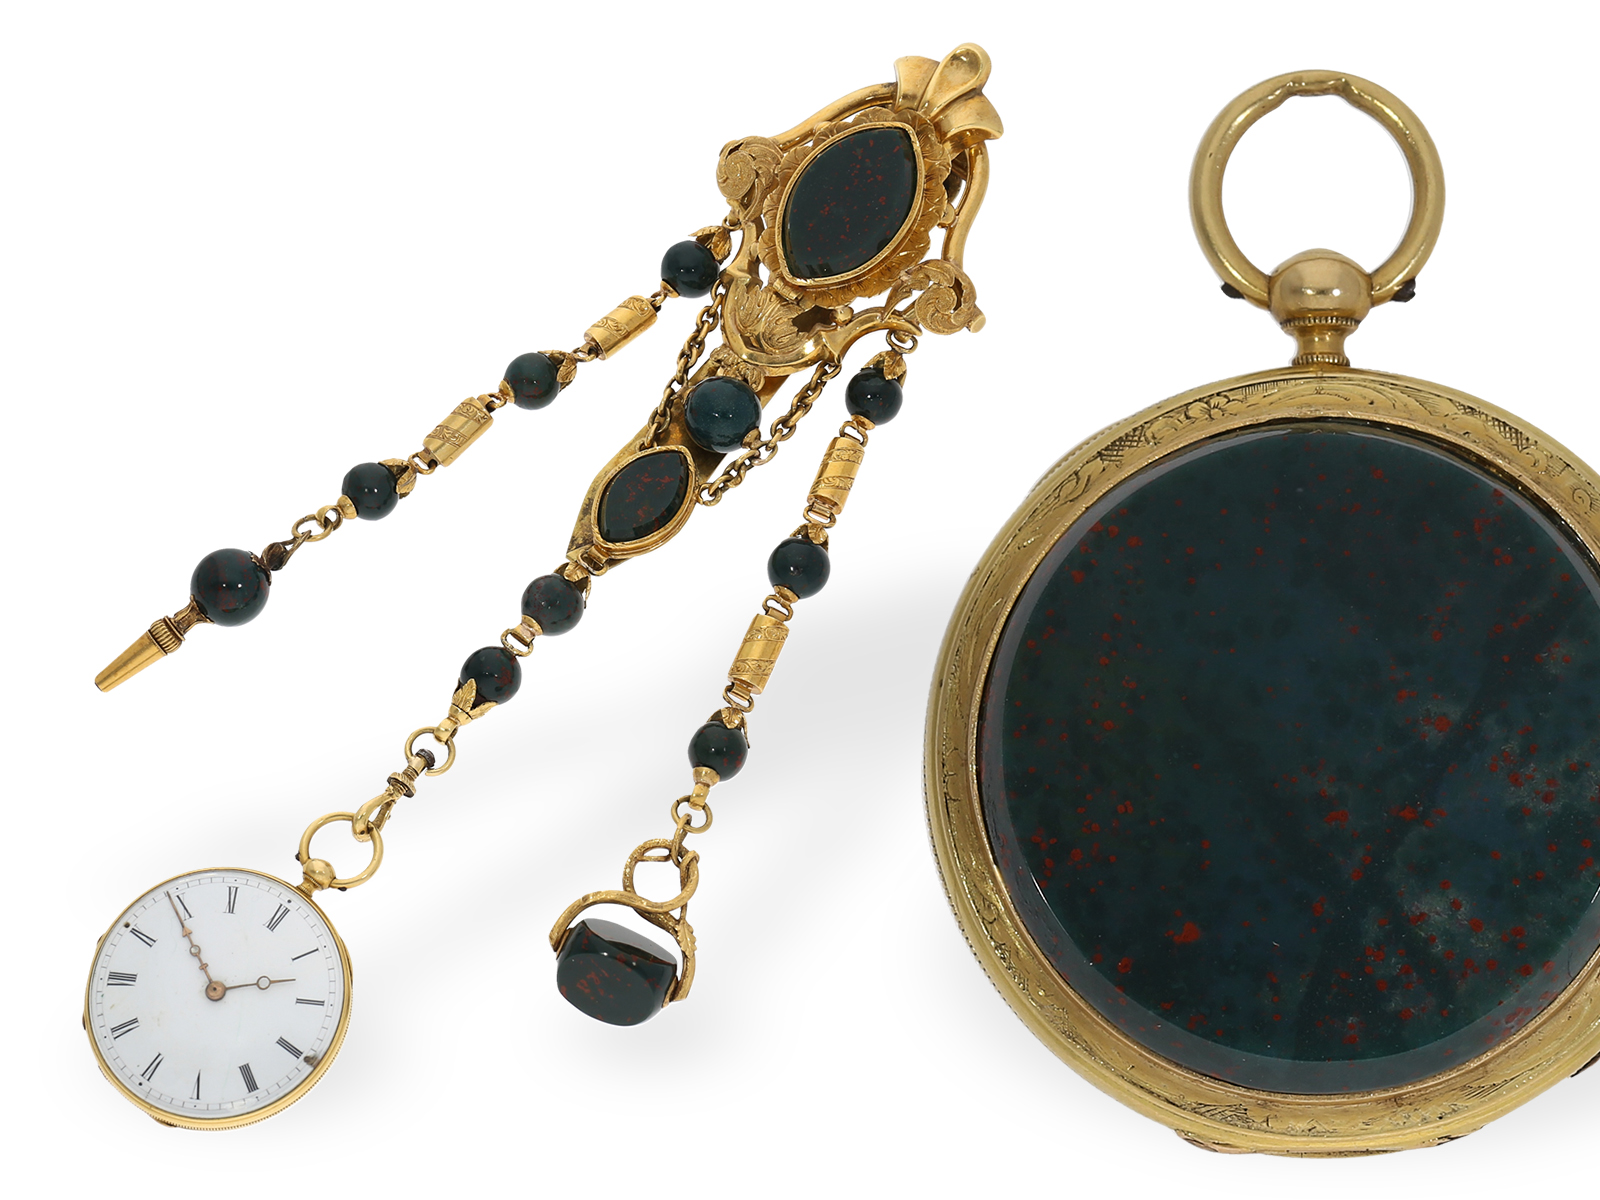 Pocket watch: rare lepine with gold/jasper case and gold/jasper chatelaine, ca. 1850